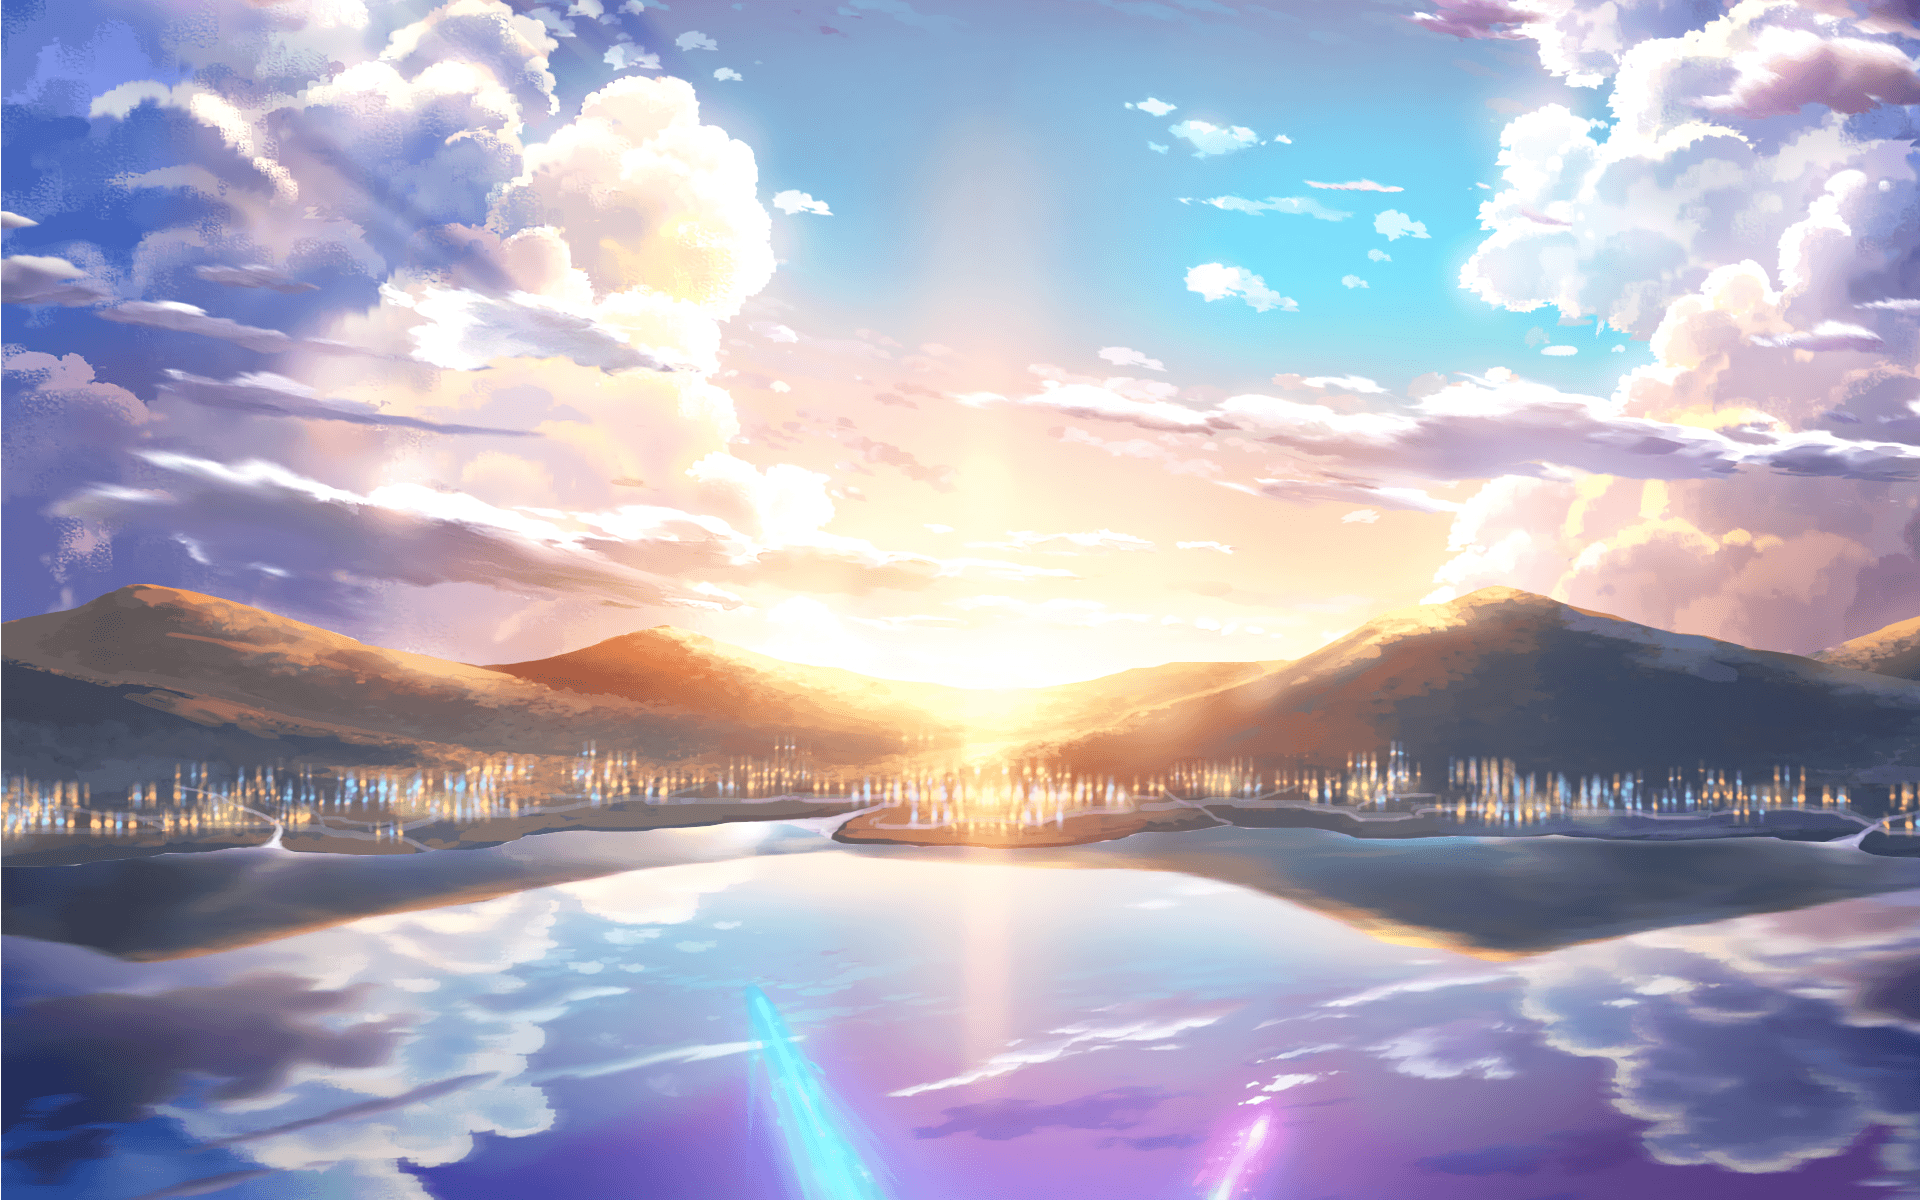 Your Name Anime Landscape Wallpapers - Top Free Your Name ...